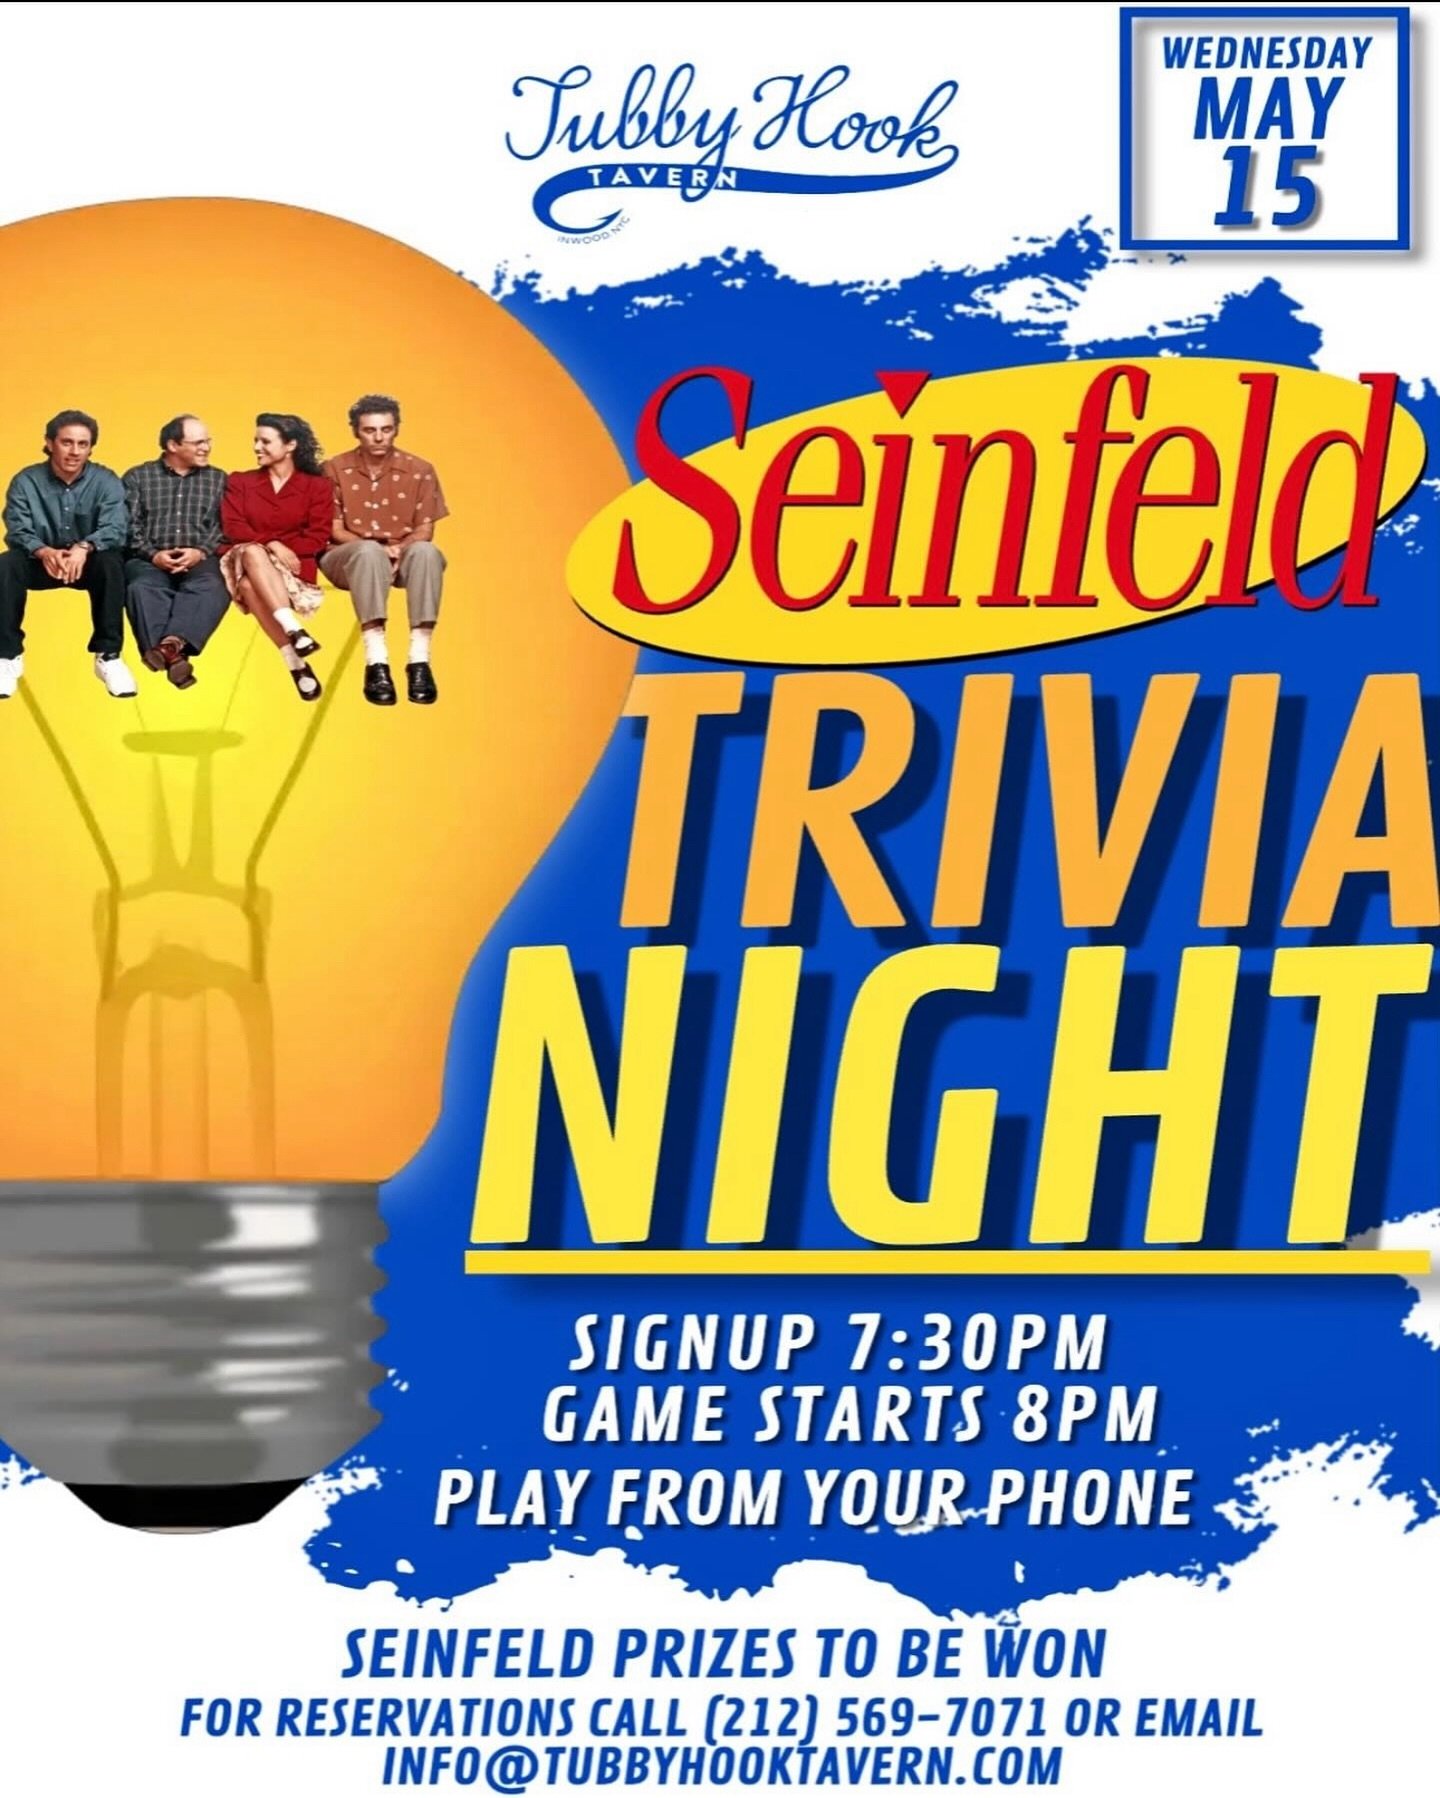 Seinfeld Trivia Tonight! Registration begins 7:30pm

For reservations call (212) 569-7071 or email us at 
Info@tubbyhooktavern.com

4946 Broadway @207th St. New York, 10034

#inwood #inwoodnyc #trivia #trivianight #seinfeld #seinfeldtrivia #quiz #qui